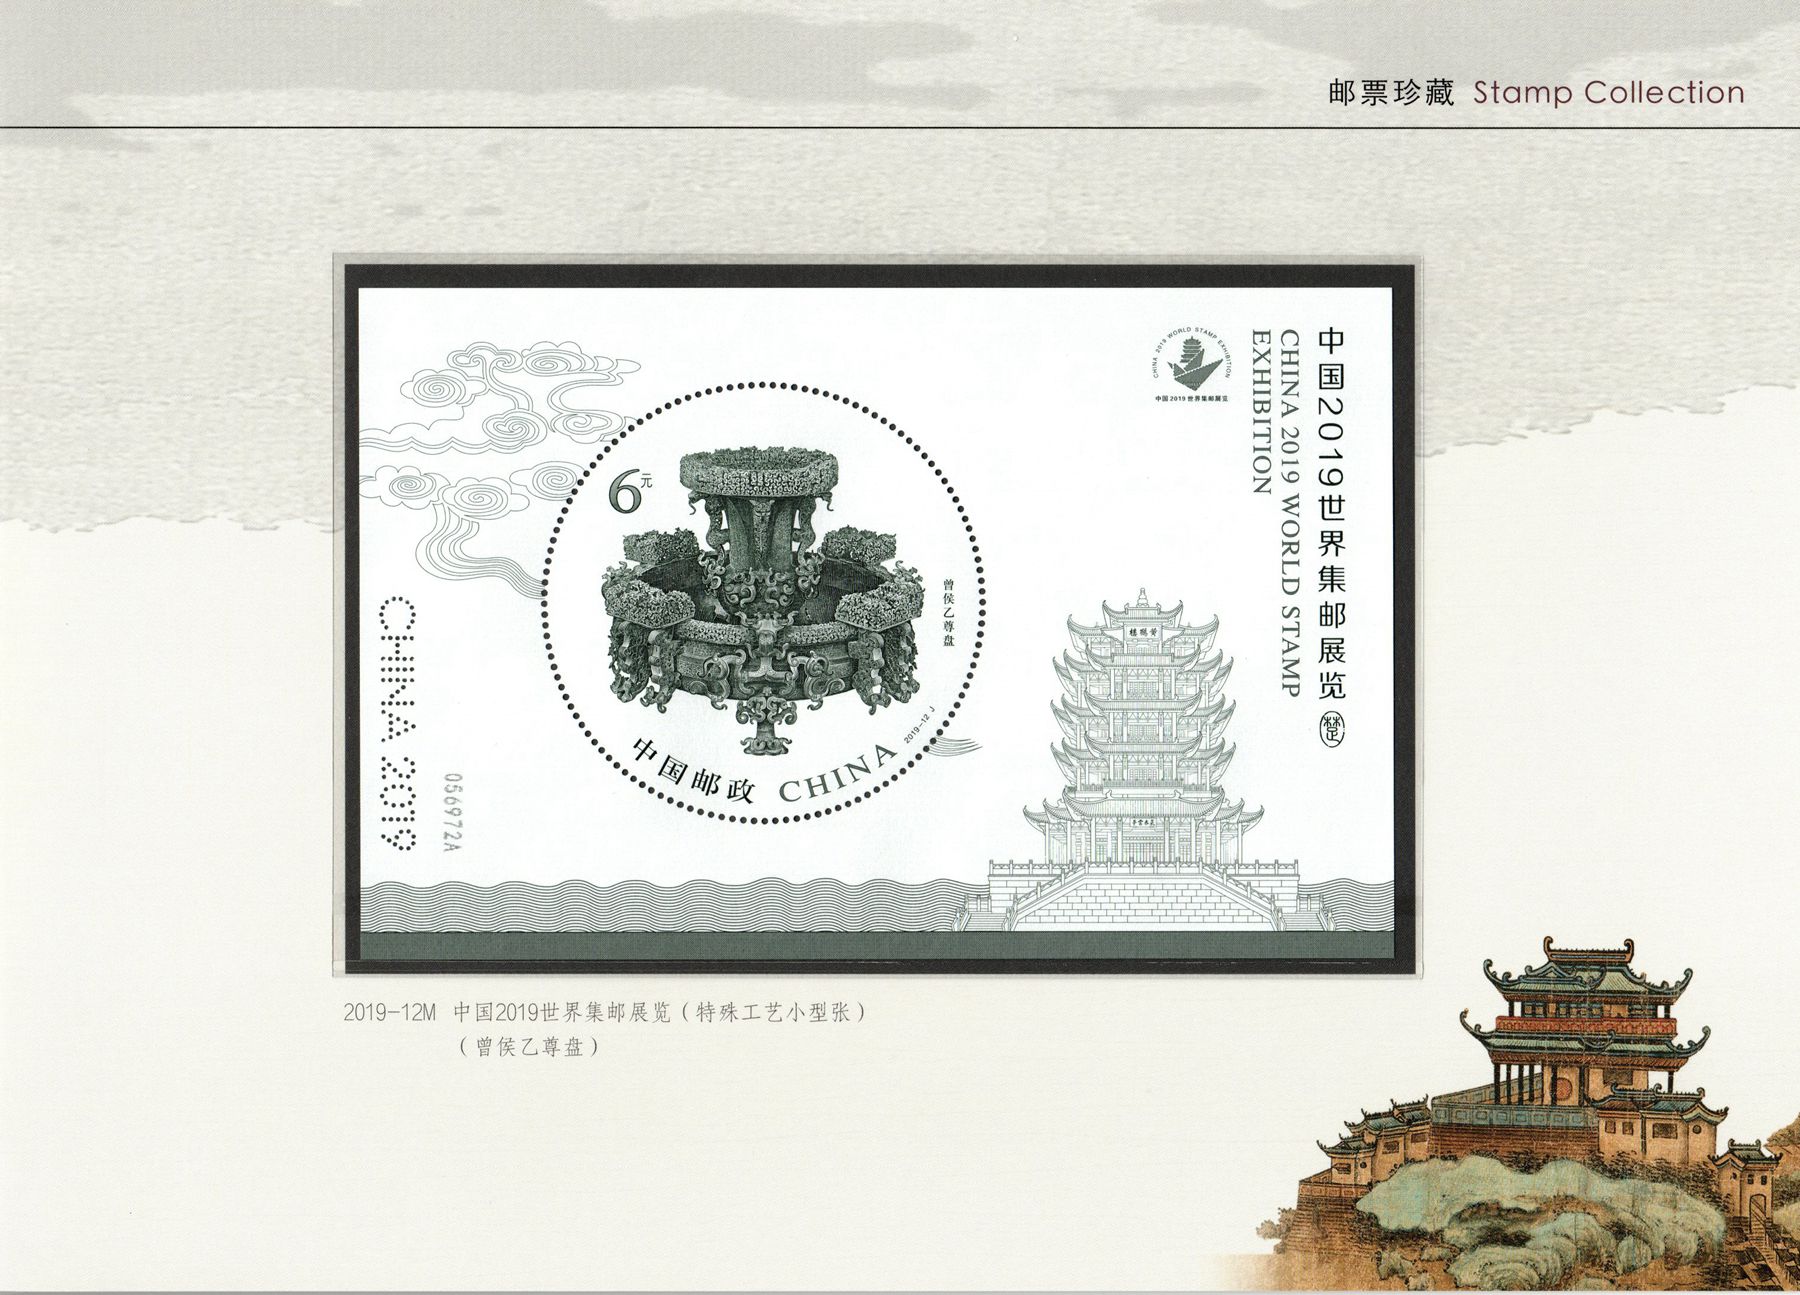 M2800, China 2019 World Stamp Exhibition, Special MS Sheet Album